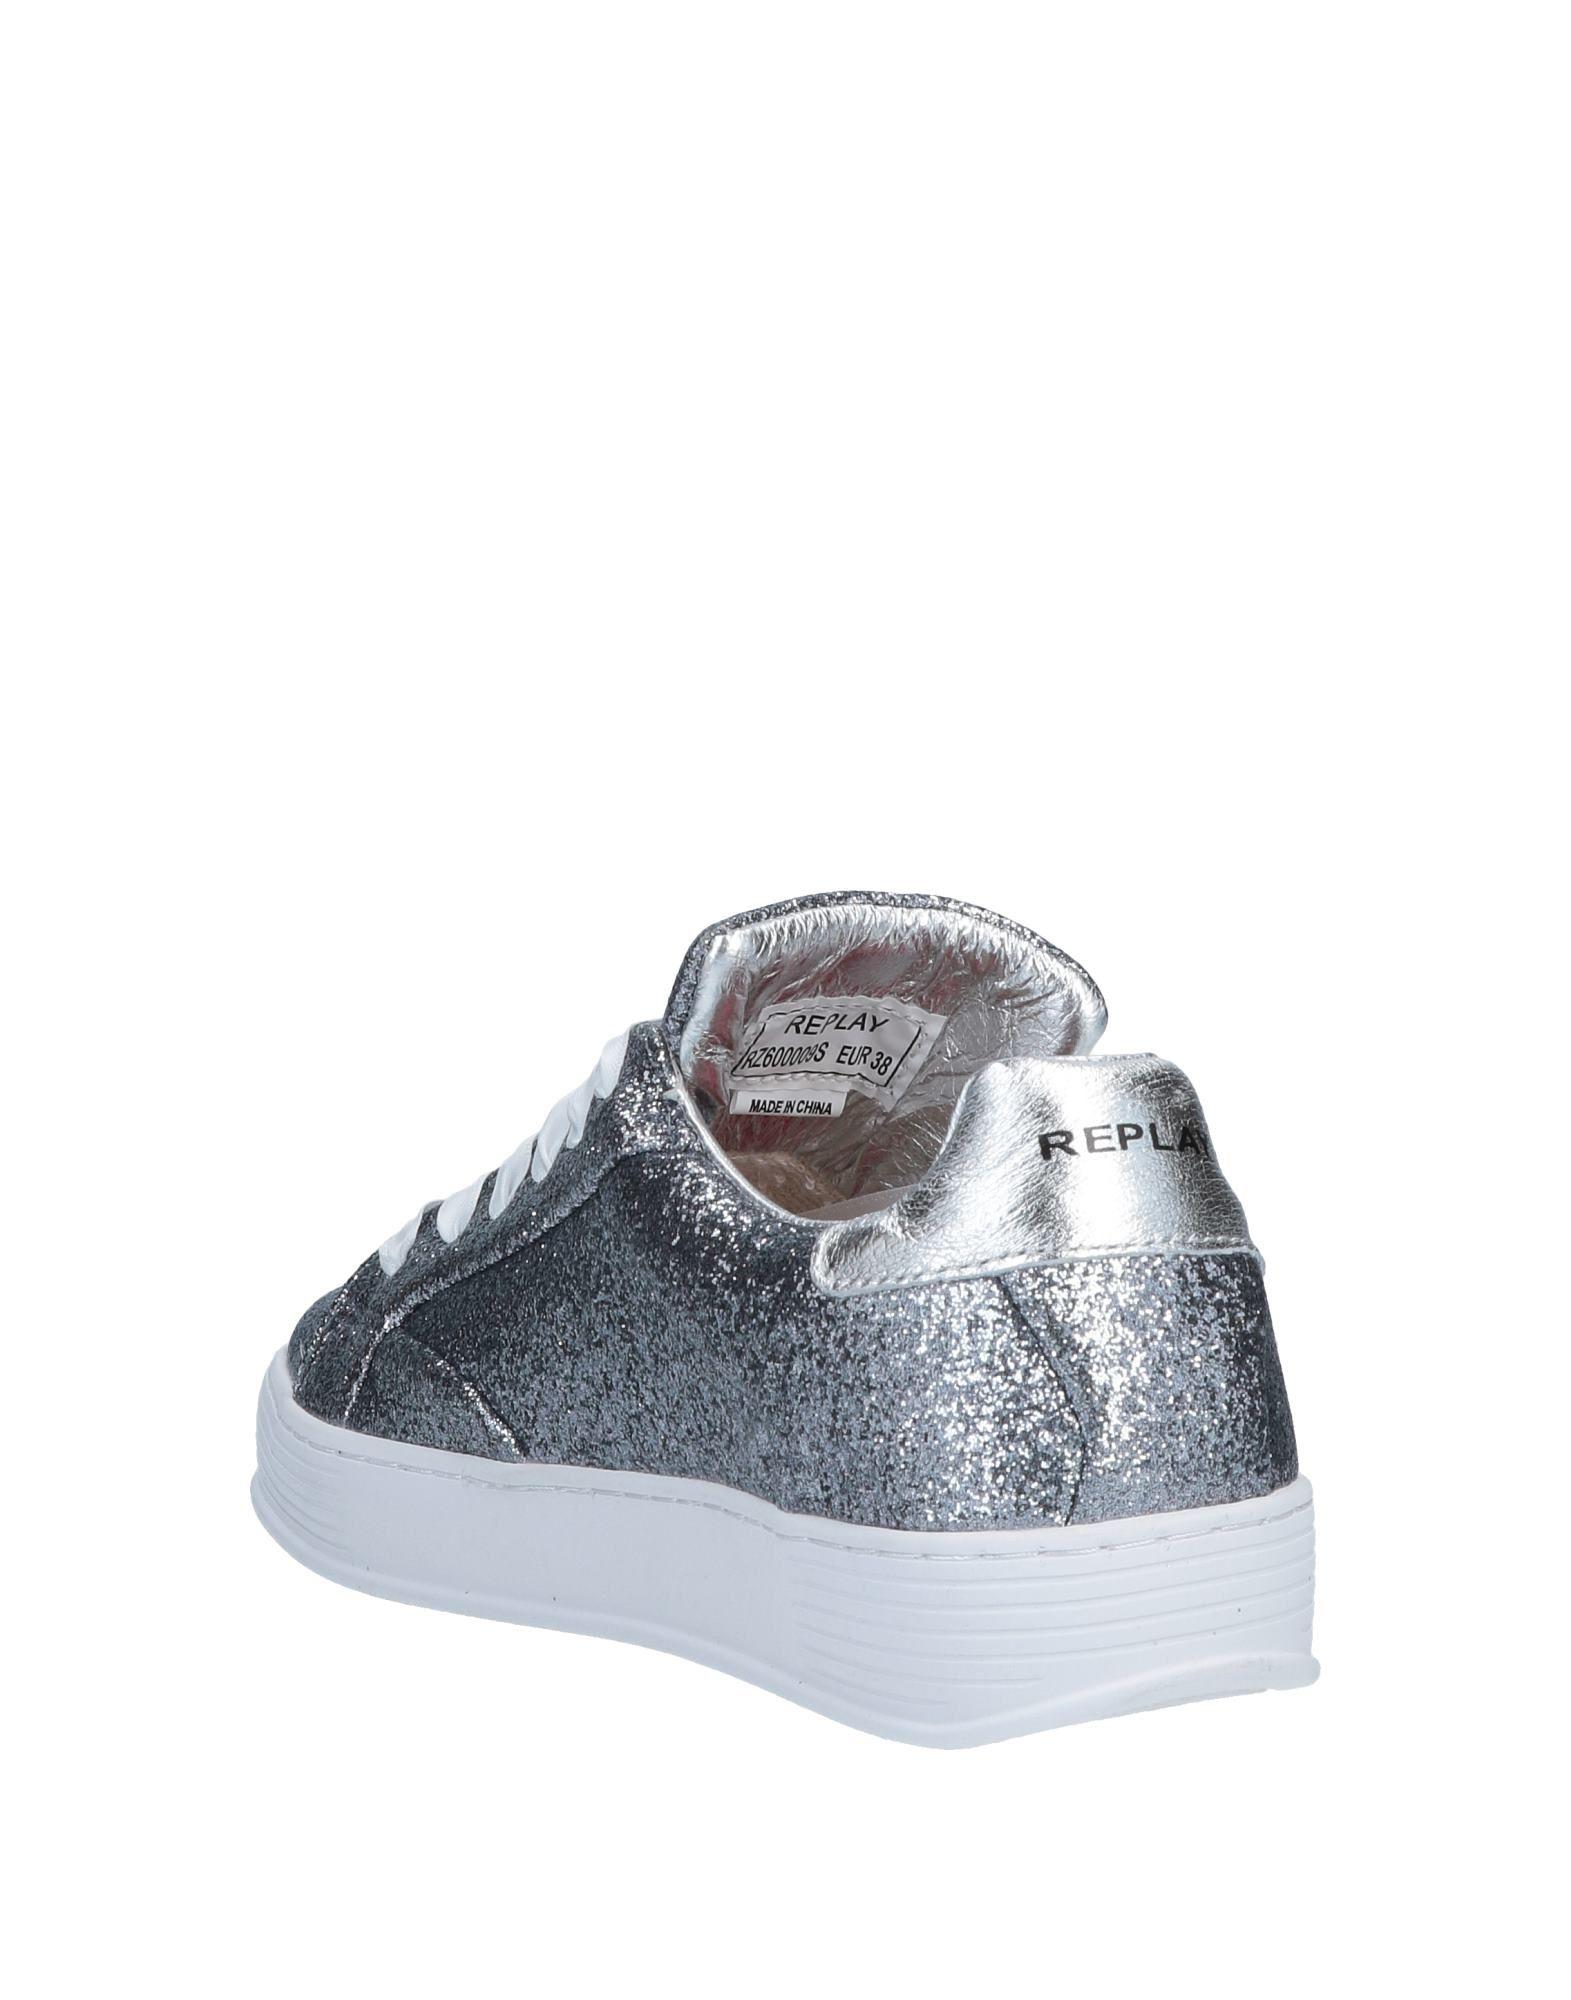 Replay Leather Low-tops & Sneakers in Lead (Grey) - Lyst